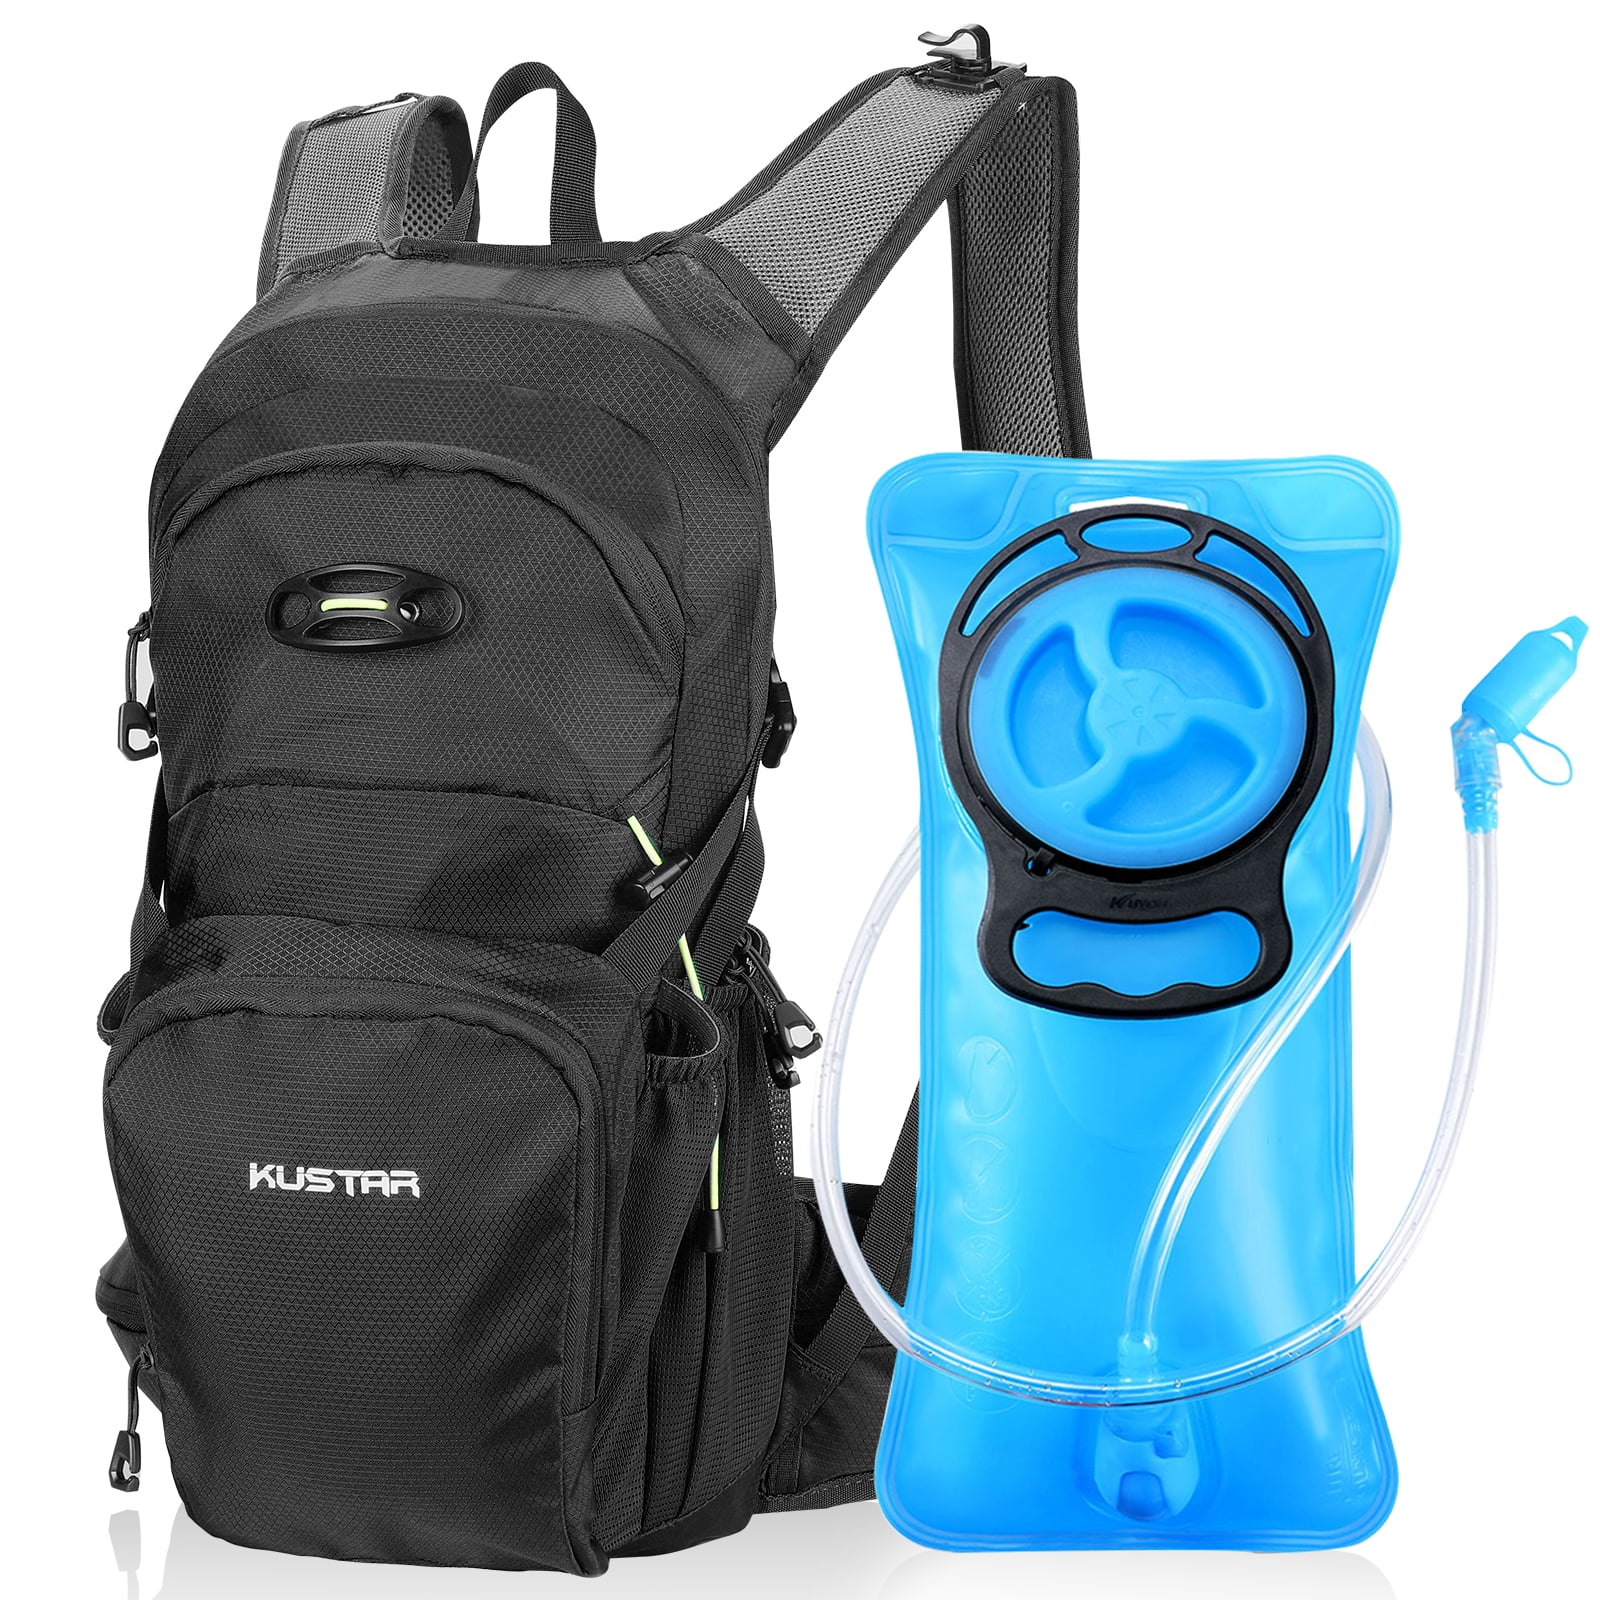 No.1 Hydration Pack Backpack with 2L Water Bladder & Cooler Bag KEEPS WATER COOL 